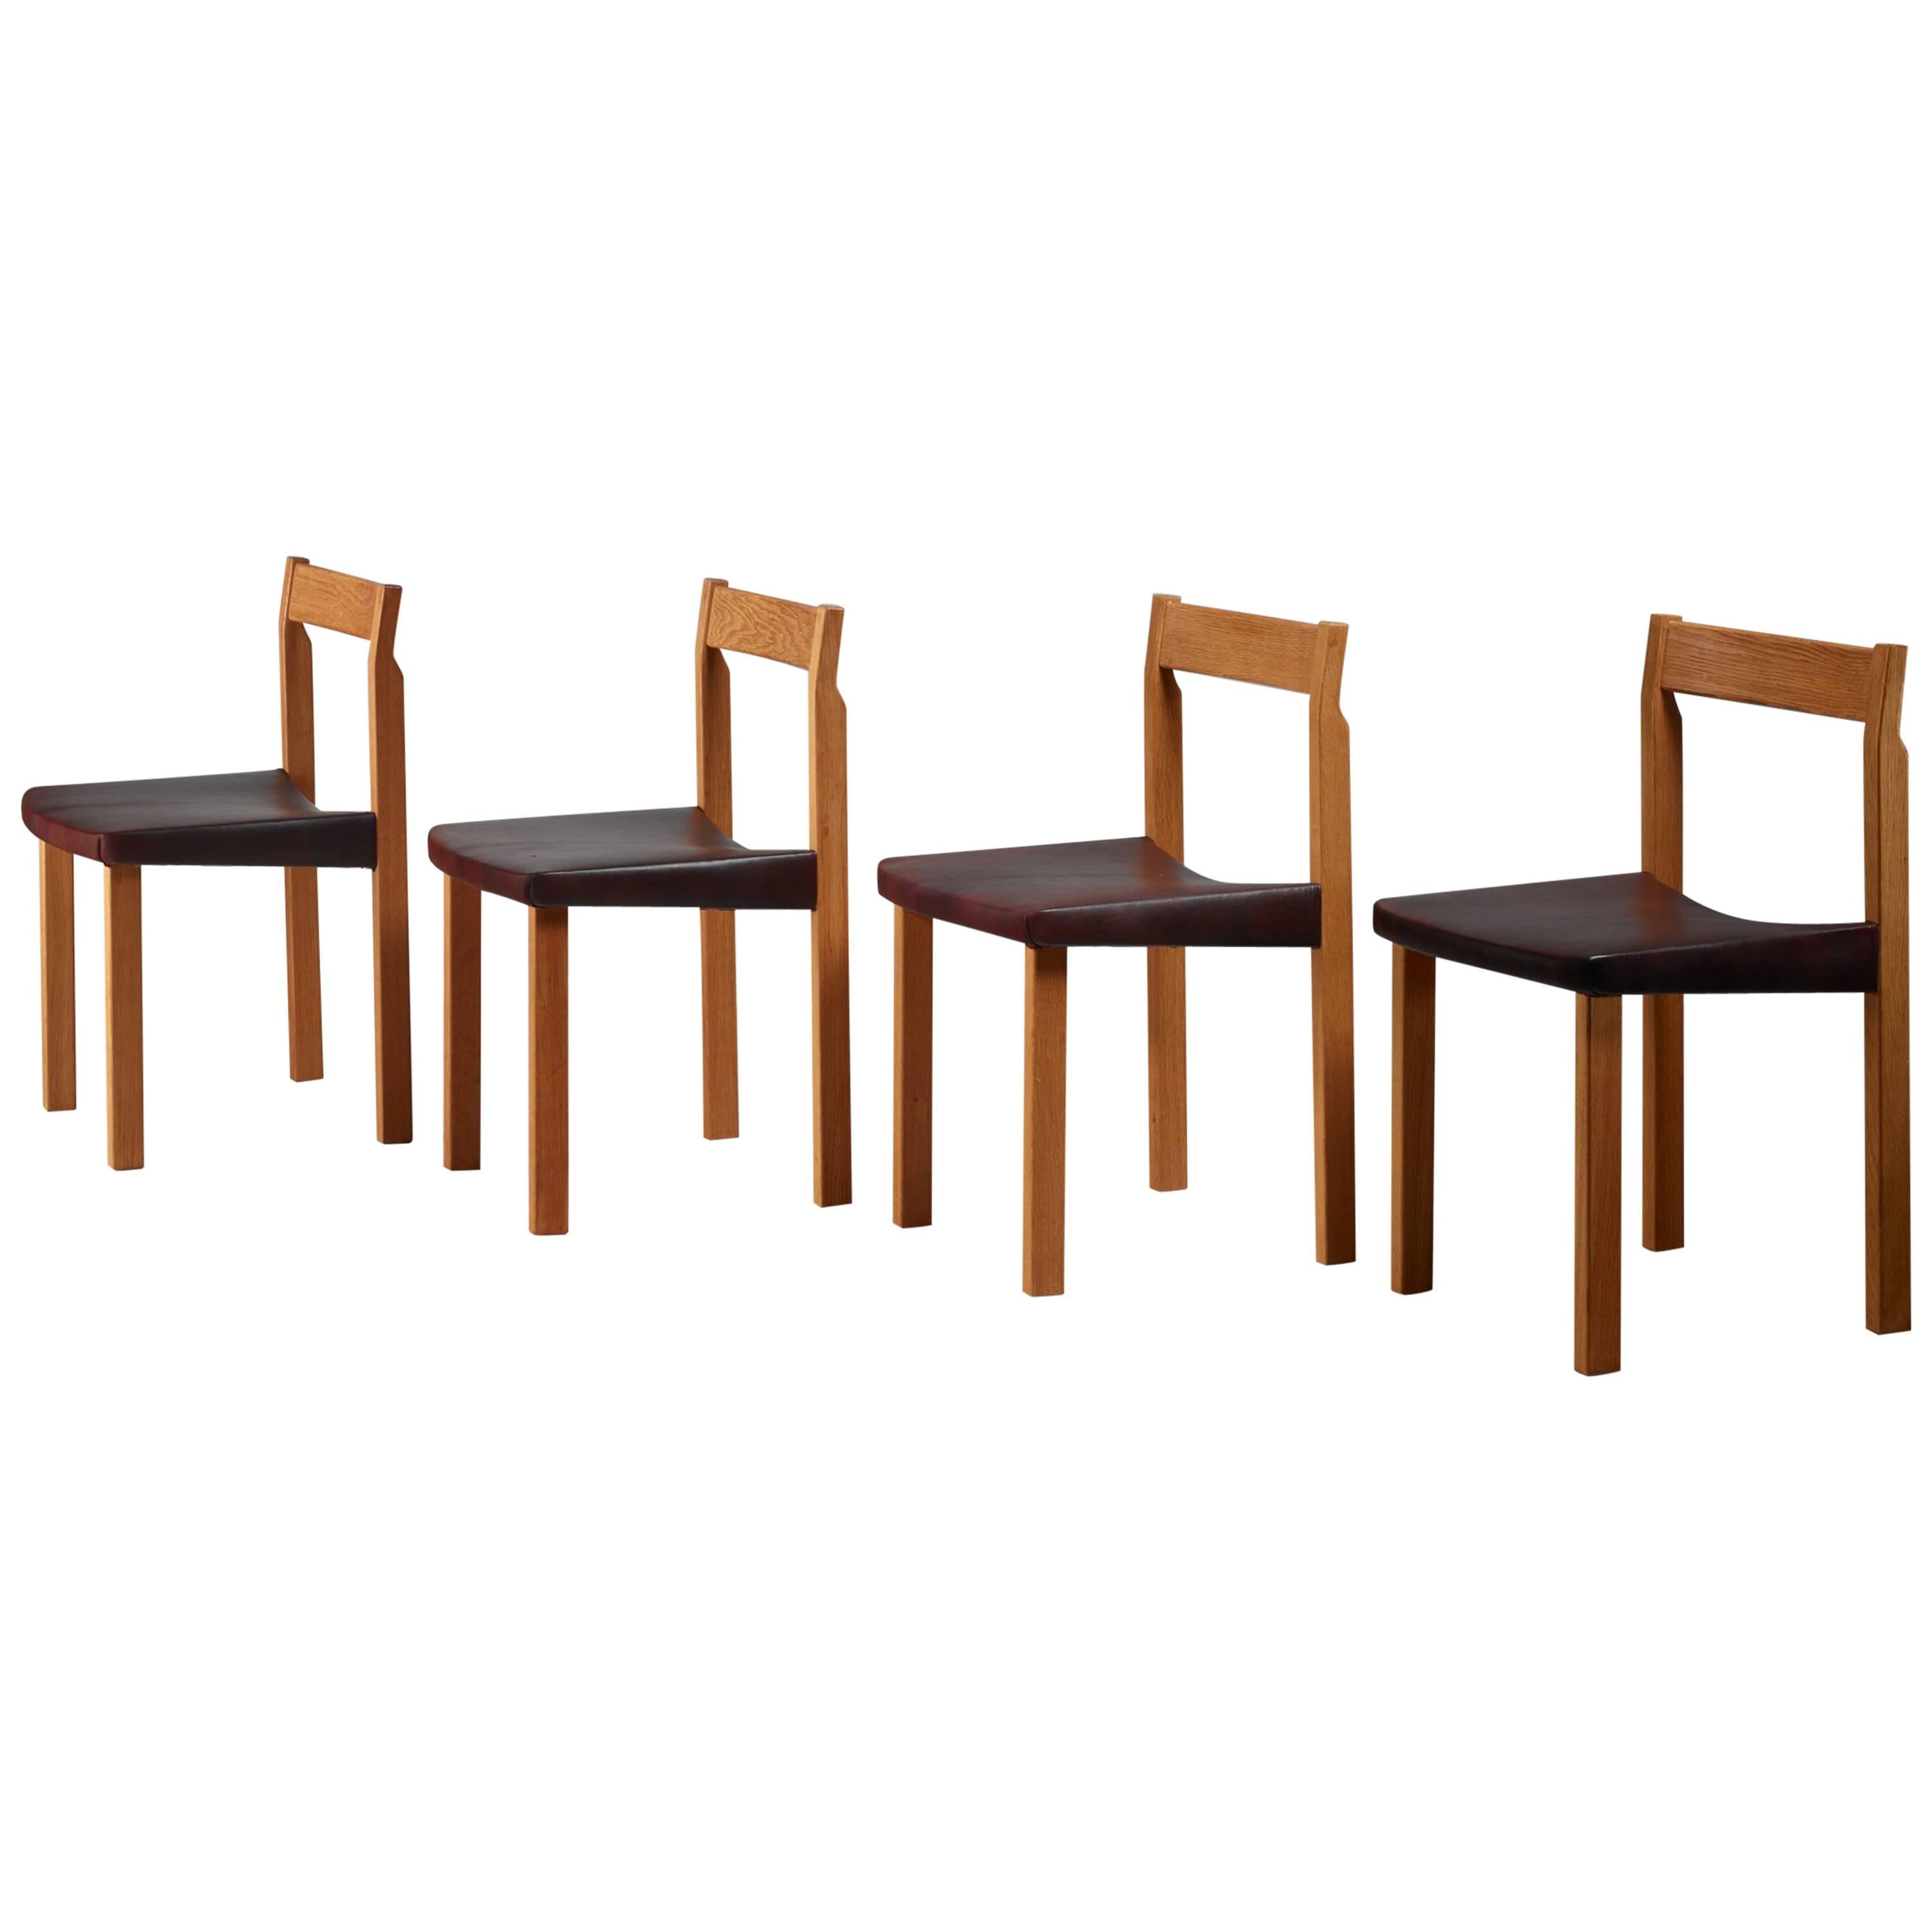 Olavi Hanninen Set of Four 'Tuomas' Dining Chairs, Finland, 1950s For Sale